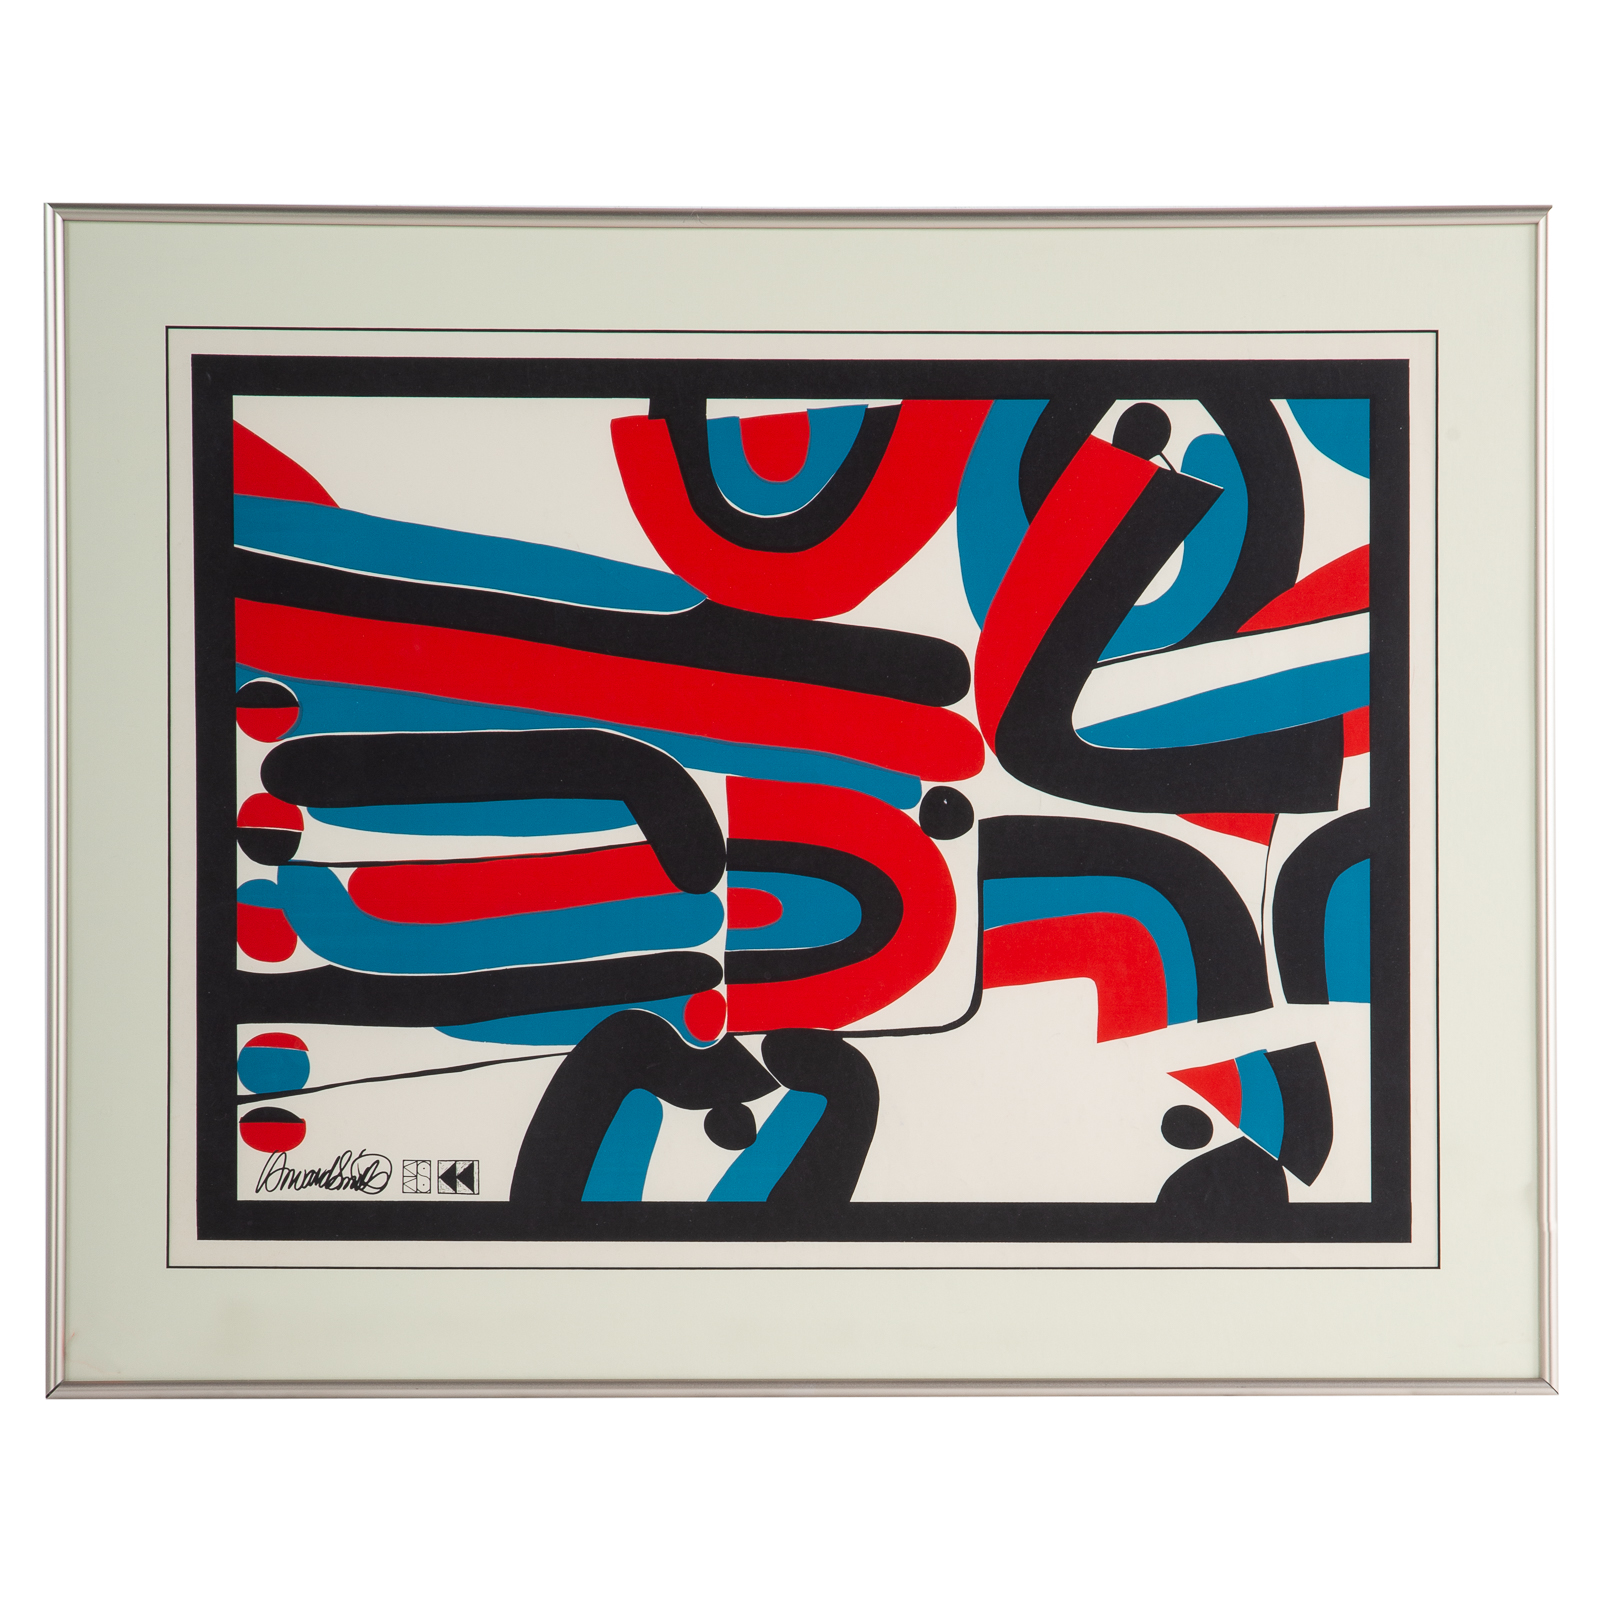 HOWARD SMITH UNTITLED SERIGRAPH 338831